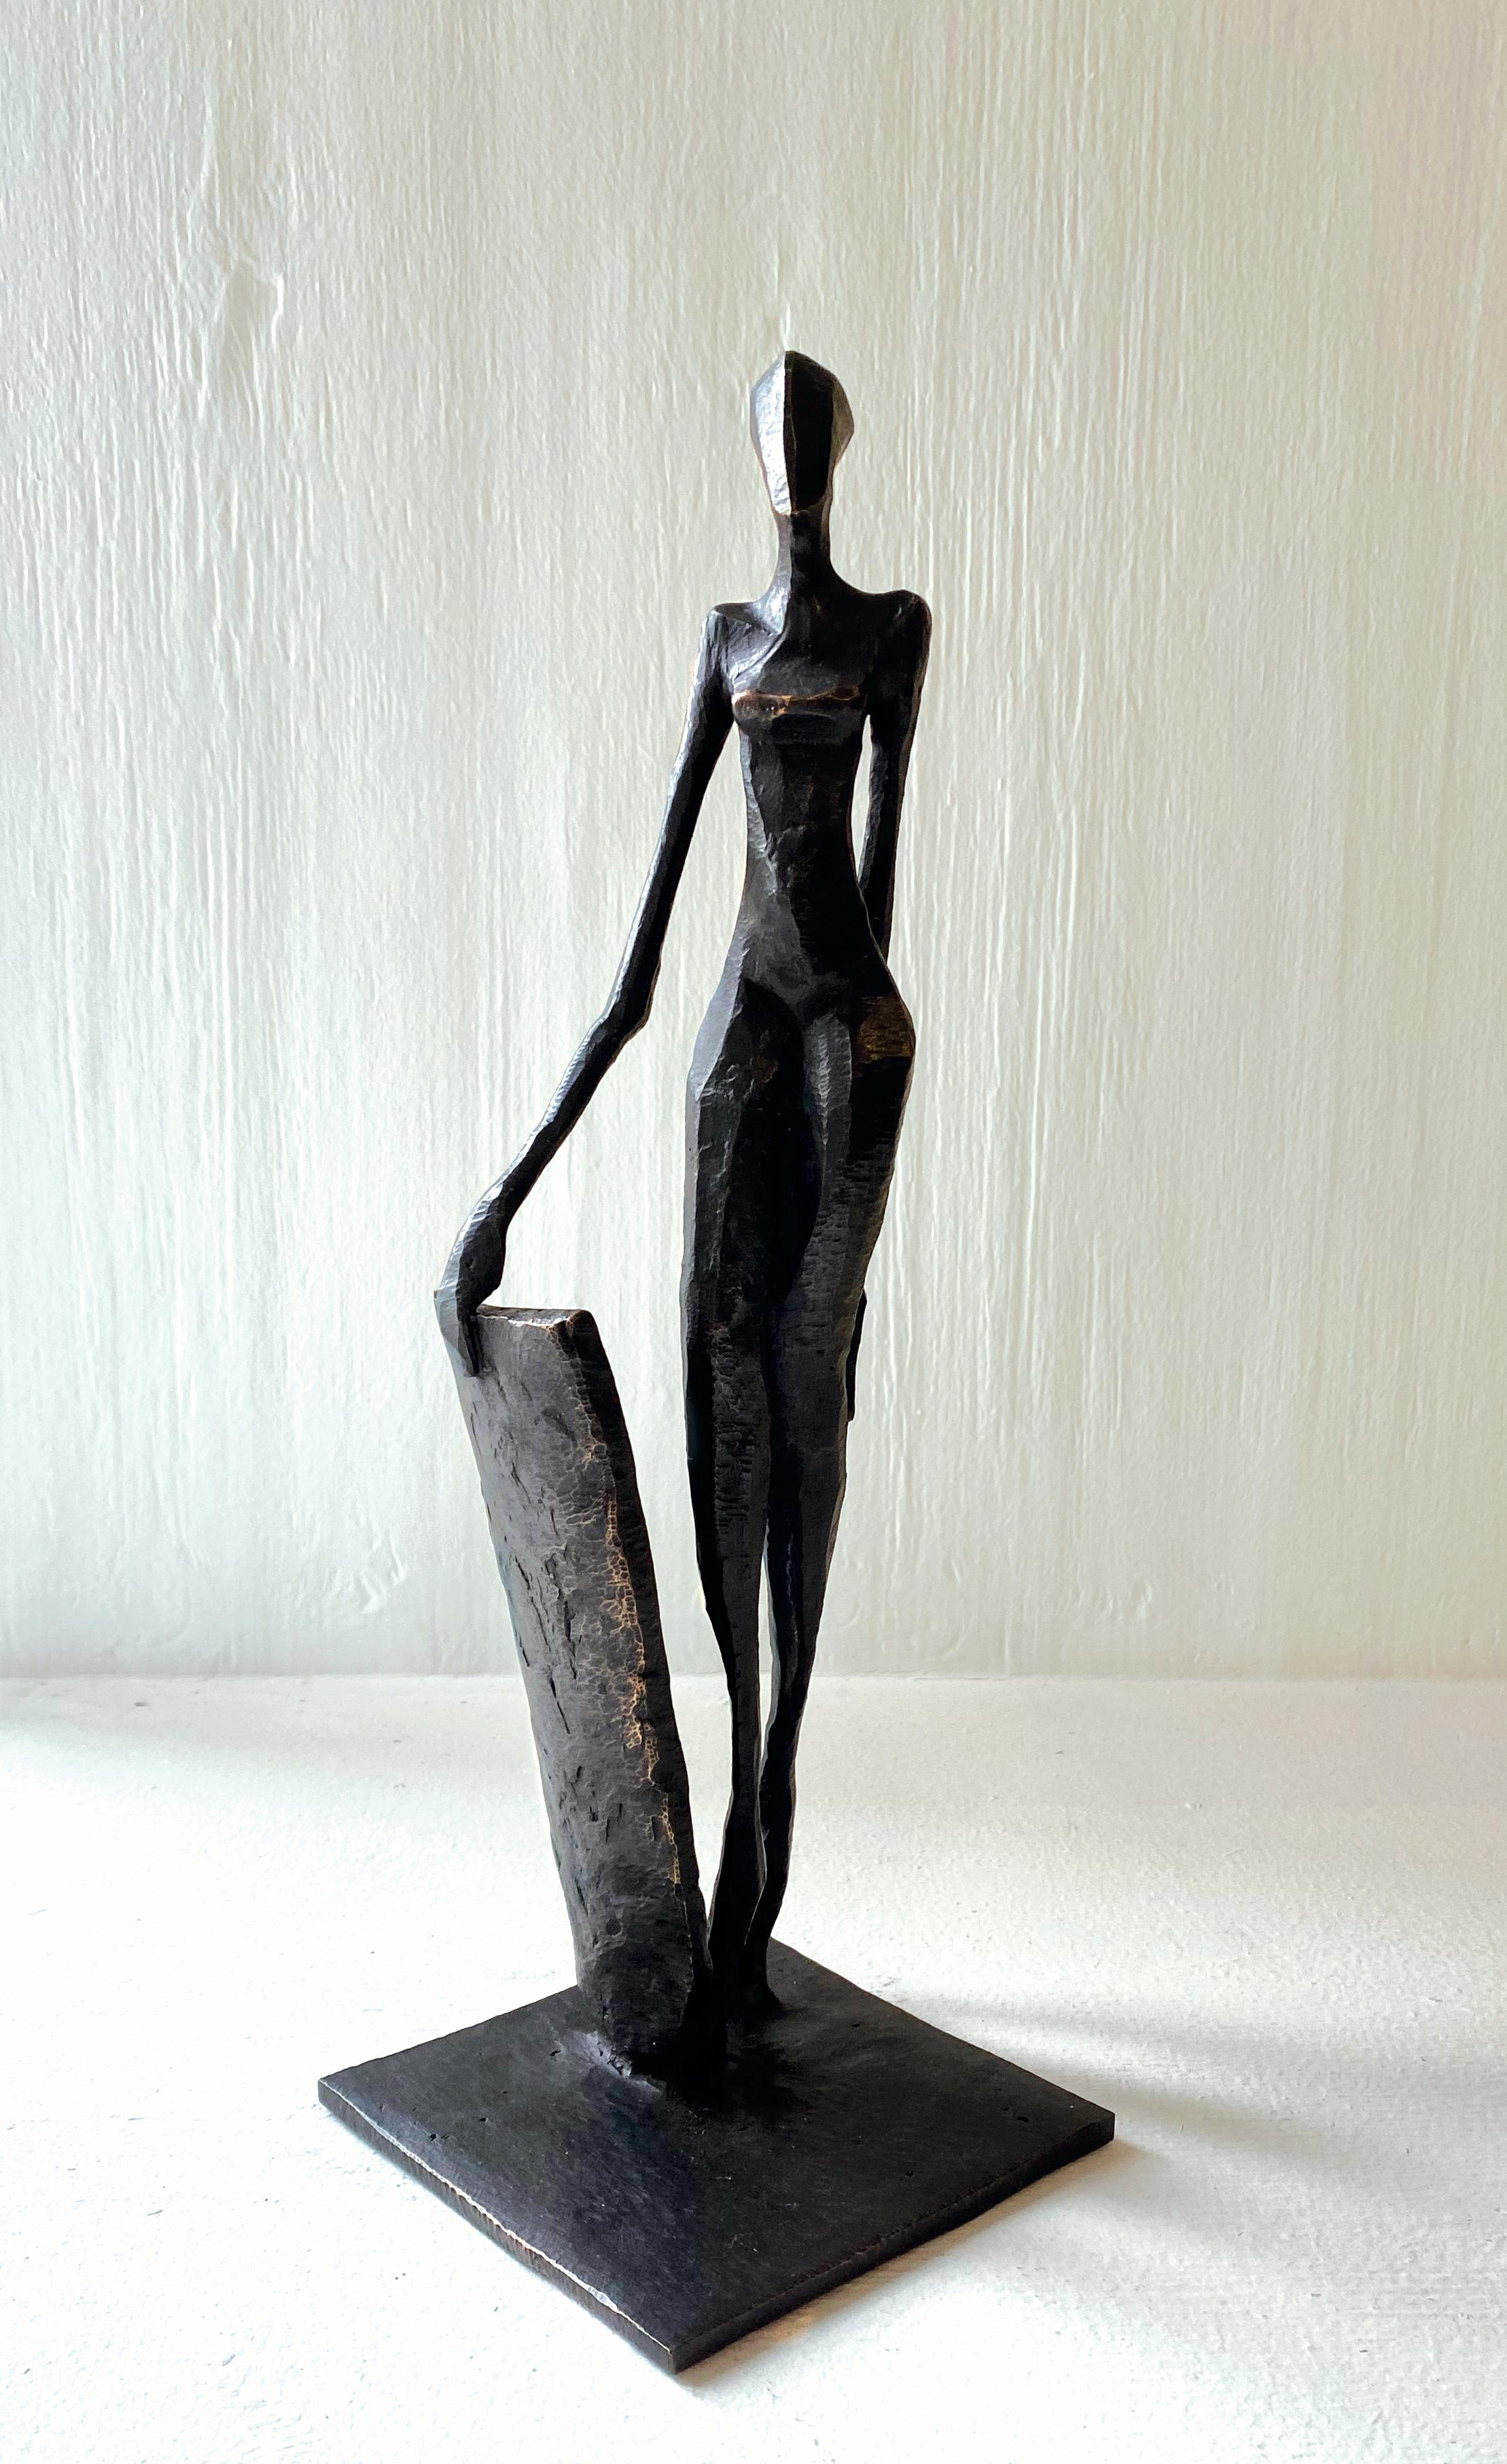 Yara is an elegant figurative bronze sculpture by Nando Kallweit.

Modelled on modern youthful postures but with a nod to the importance of heritage through the stylised Egyptian-influenced head. A lovely piece on its own or with a group of